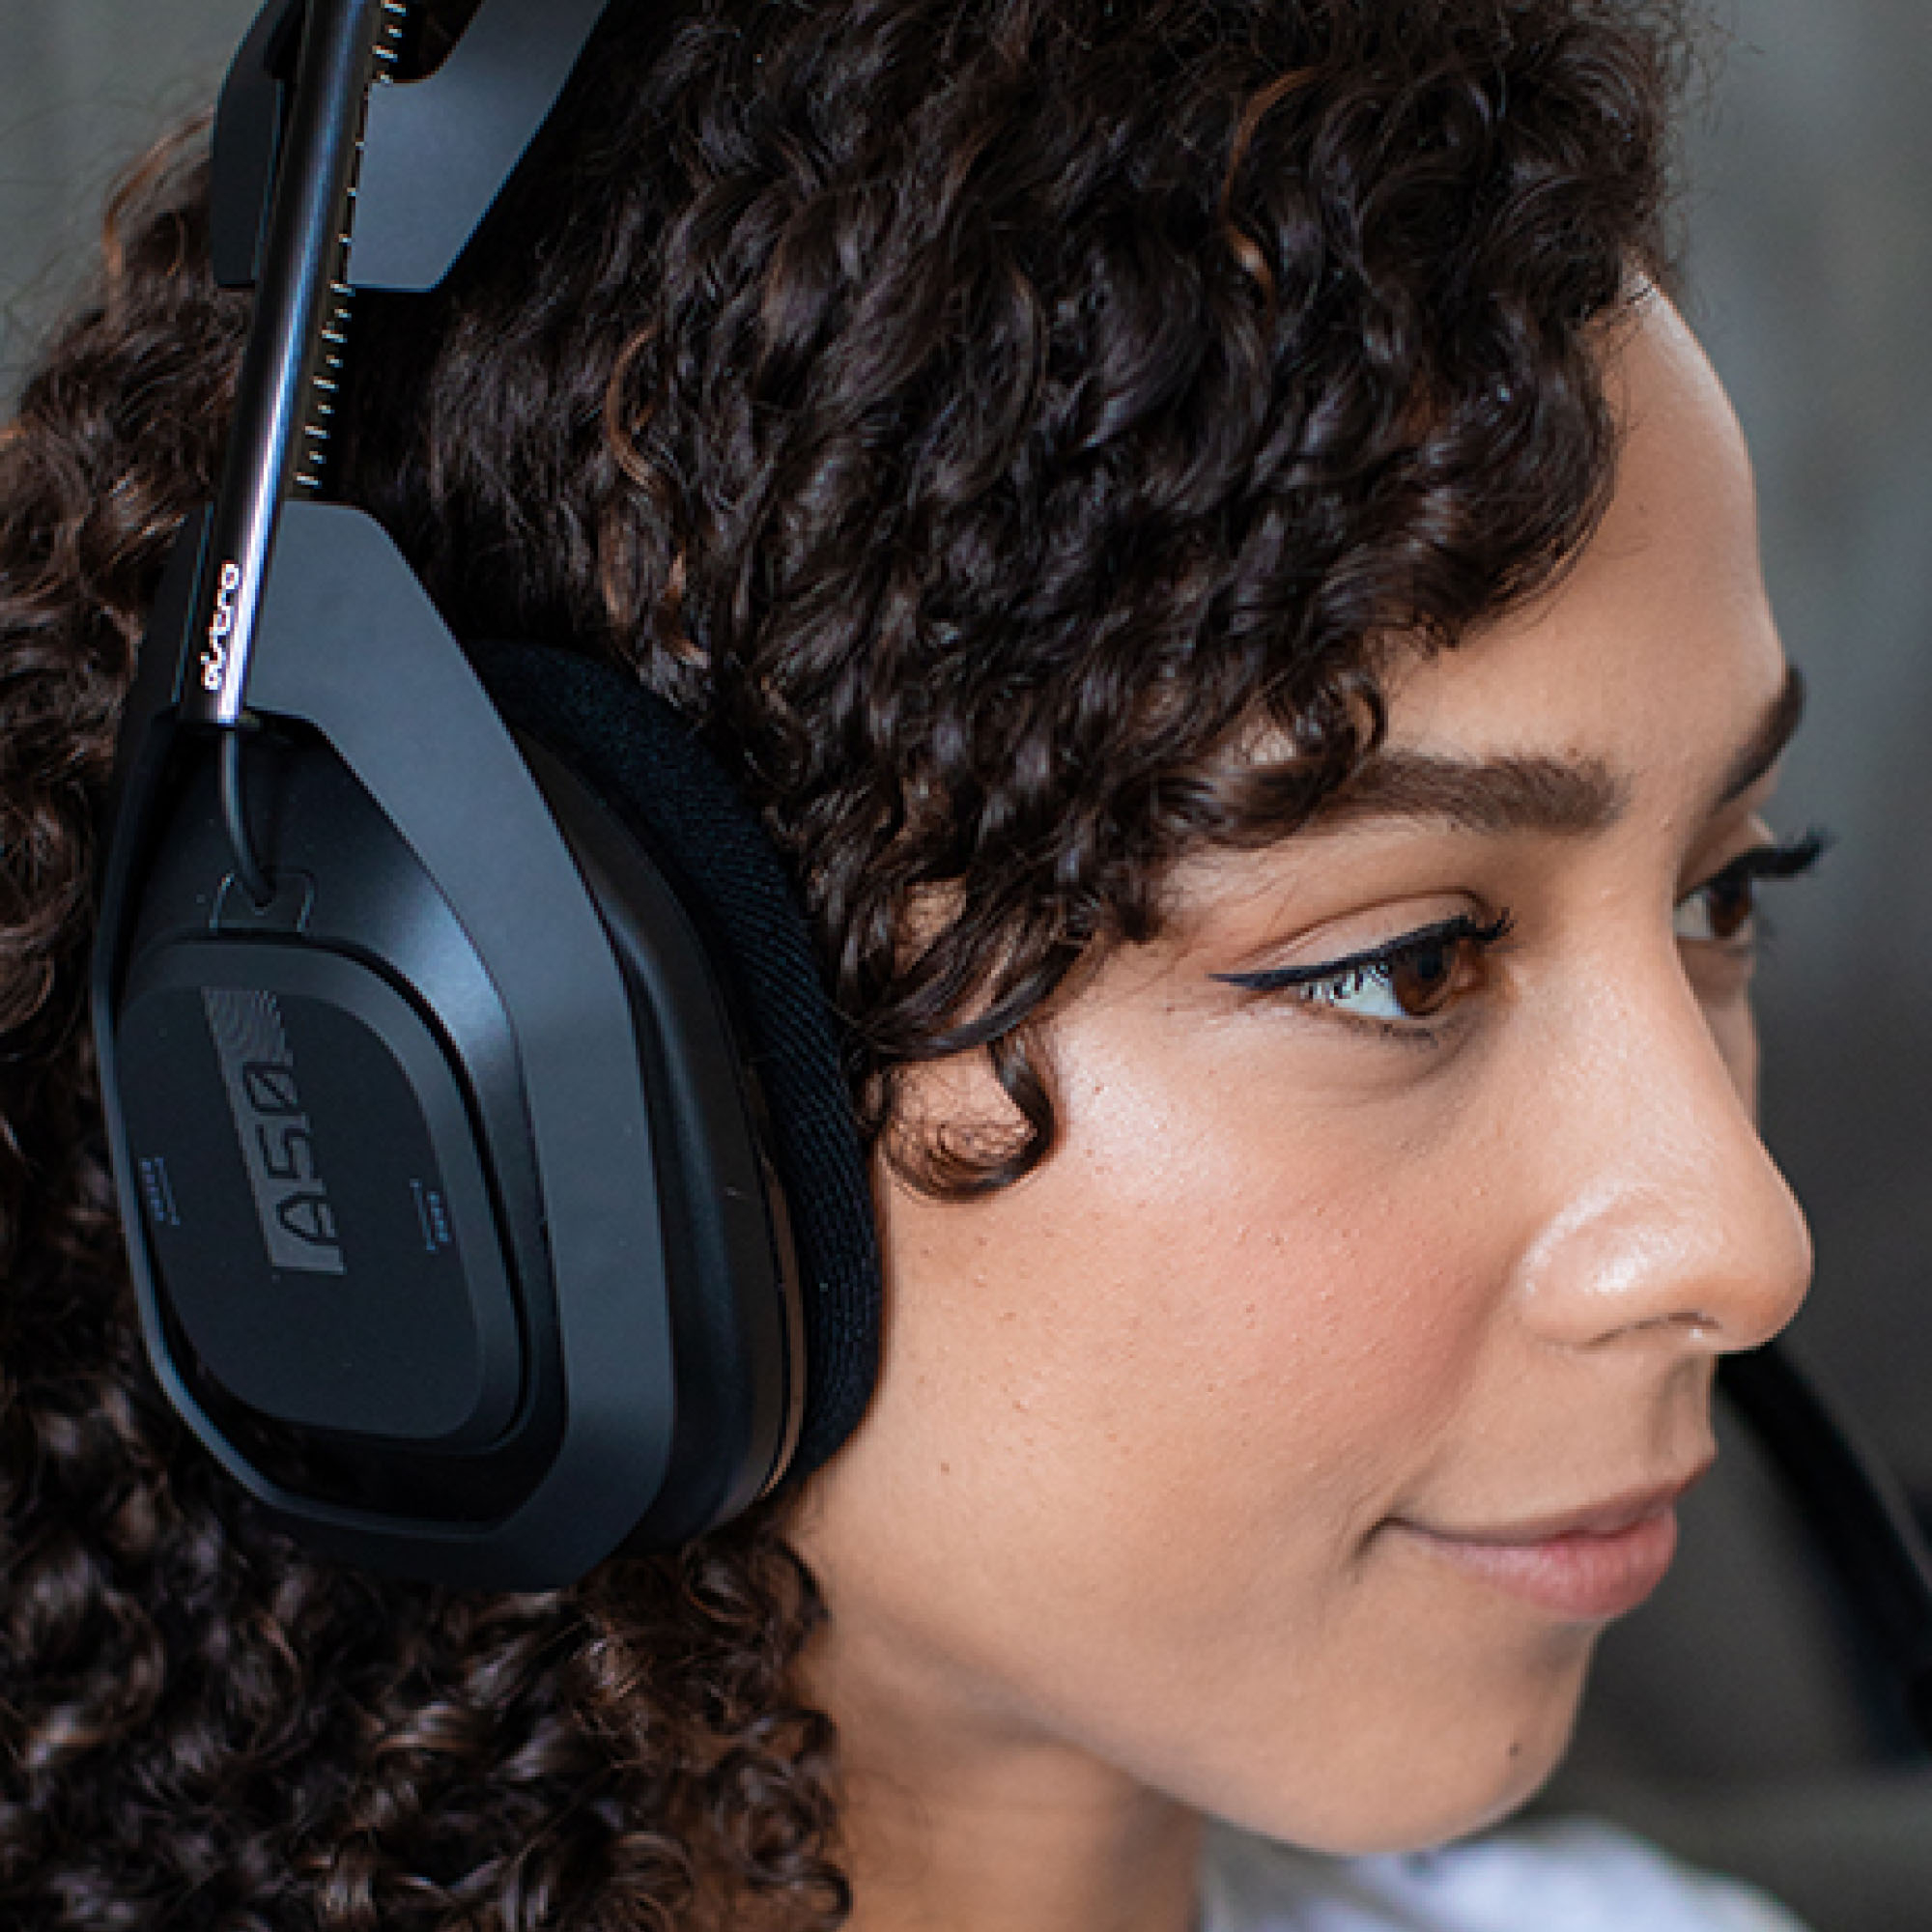 Astro Gaming A50 Wireless Dolby Atmos Over-the-Ear Headphones for 